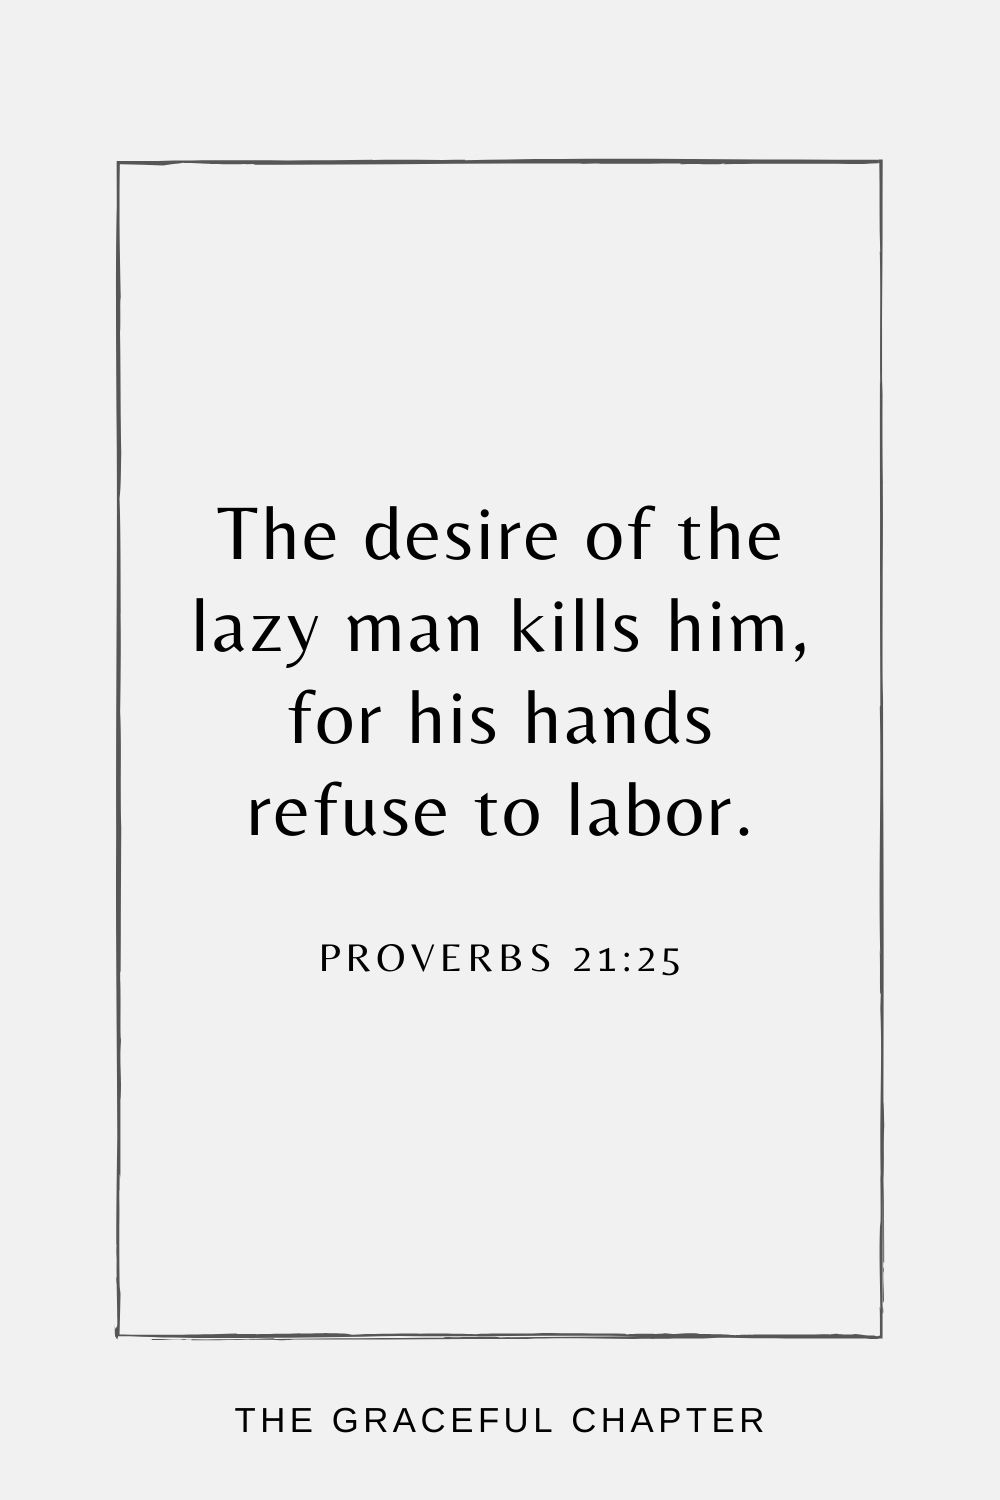 The desire of the lazy man kills him, for his hands refuse to labor. Proverbs 21:25